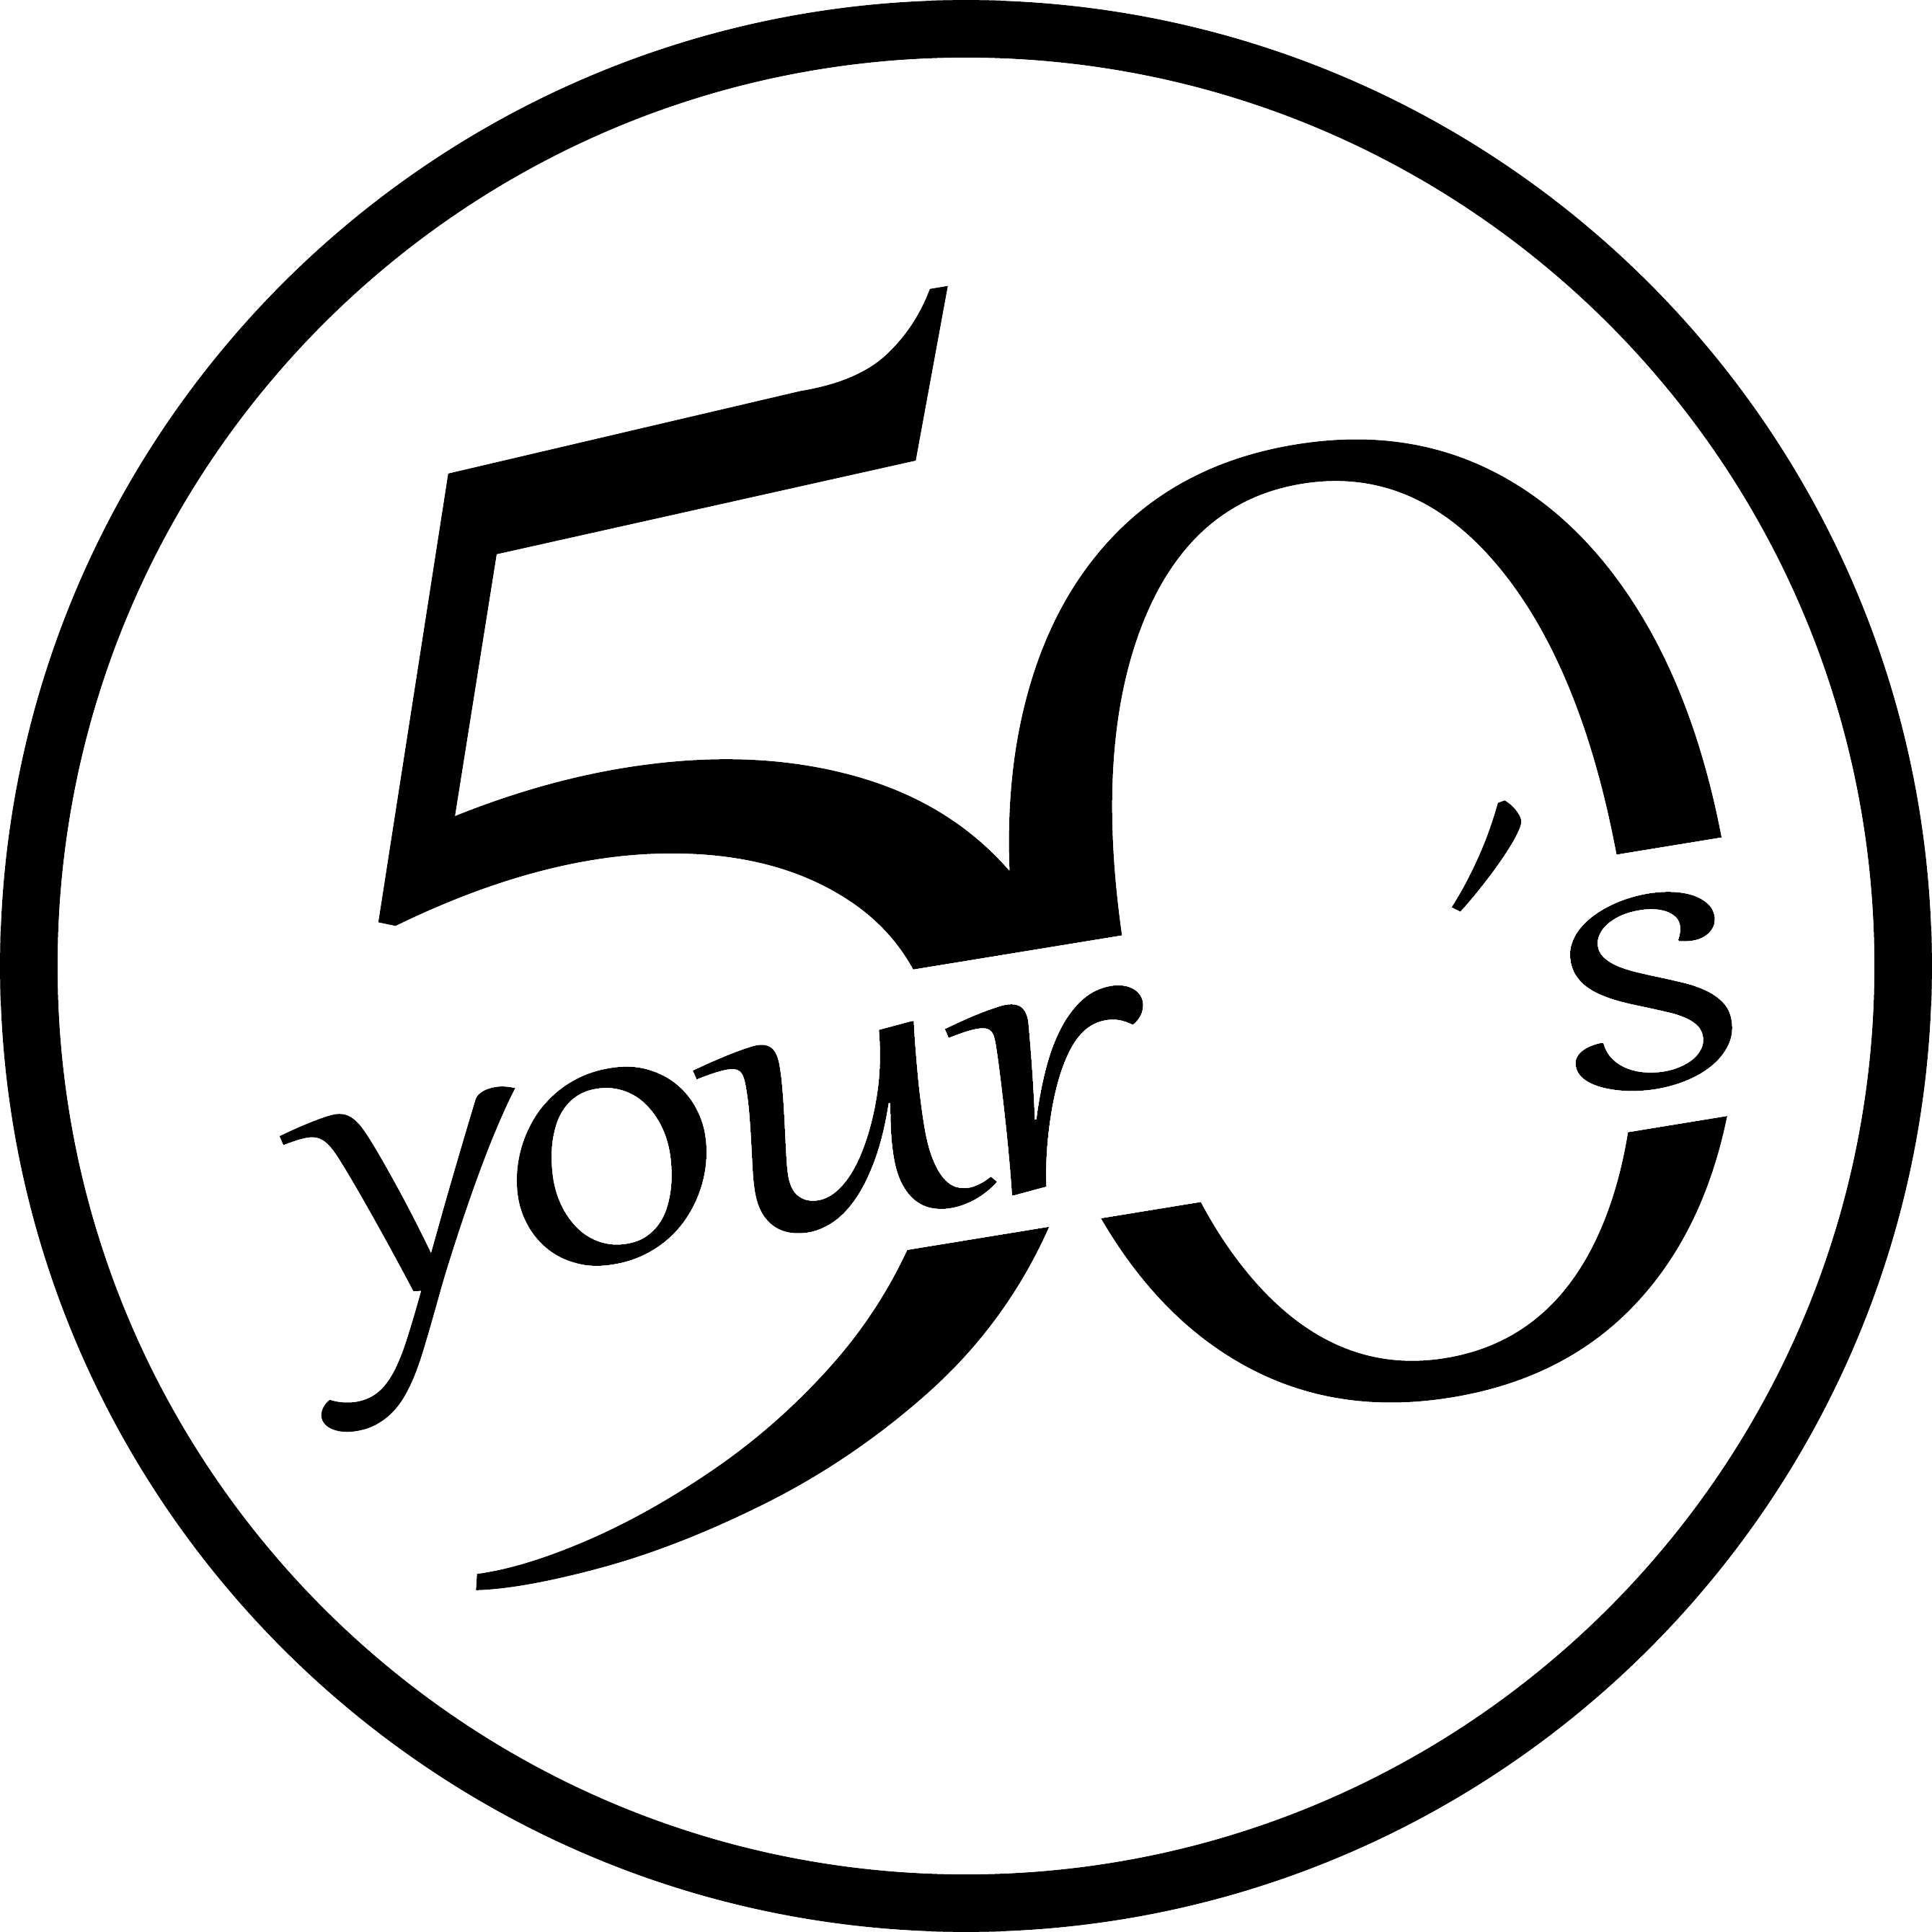 Your_50s_logo